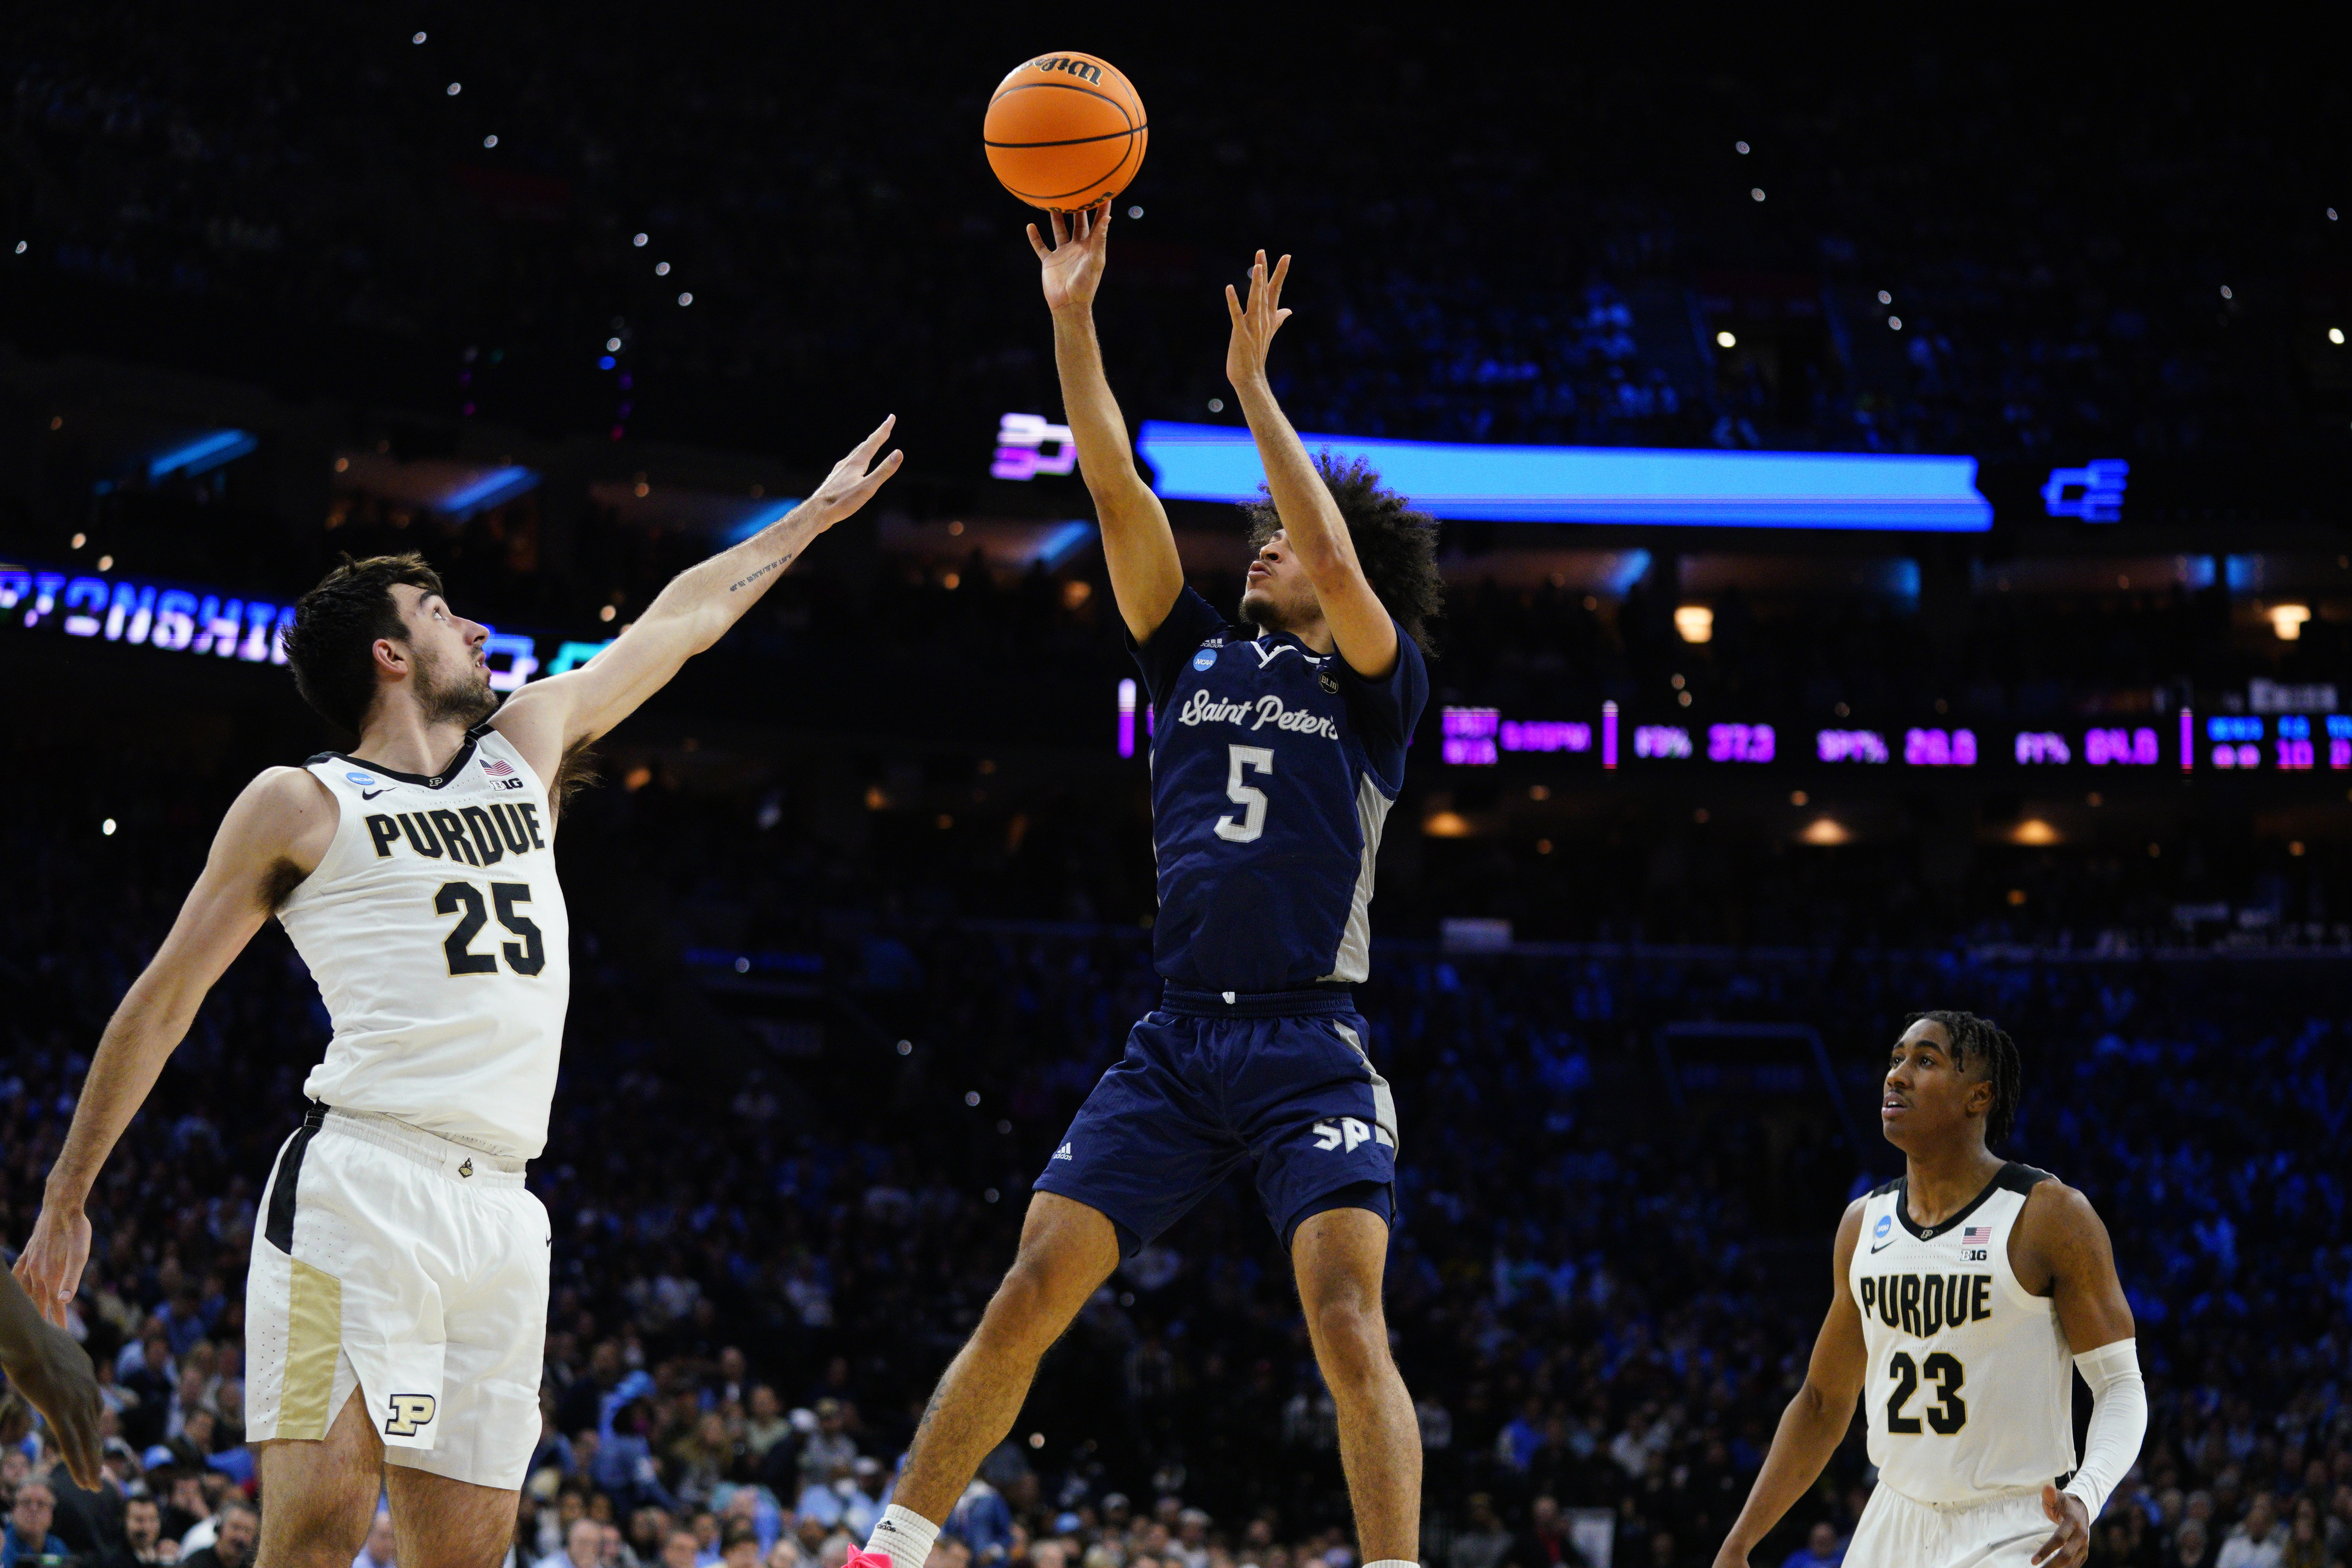 Saint Peter's Upsets Purdue, Becomes 1st No. 15 Seed to Advance to Elite Eight